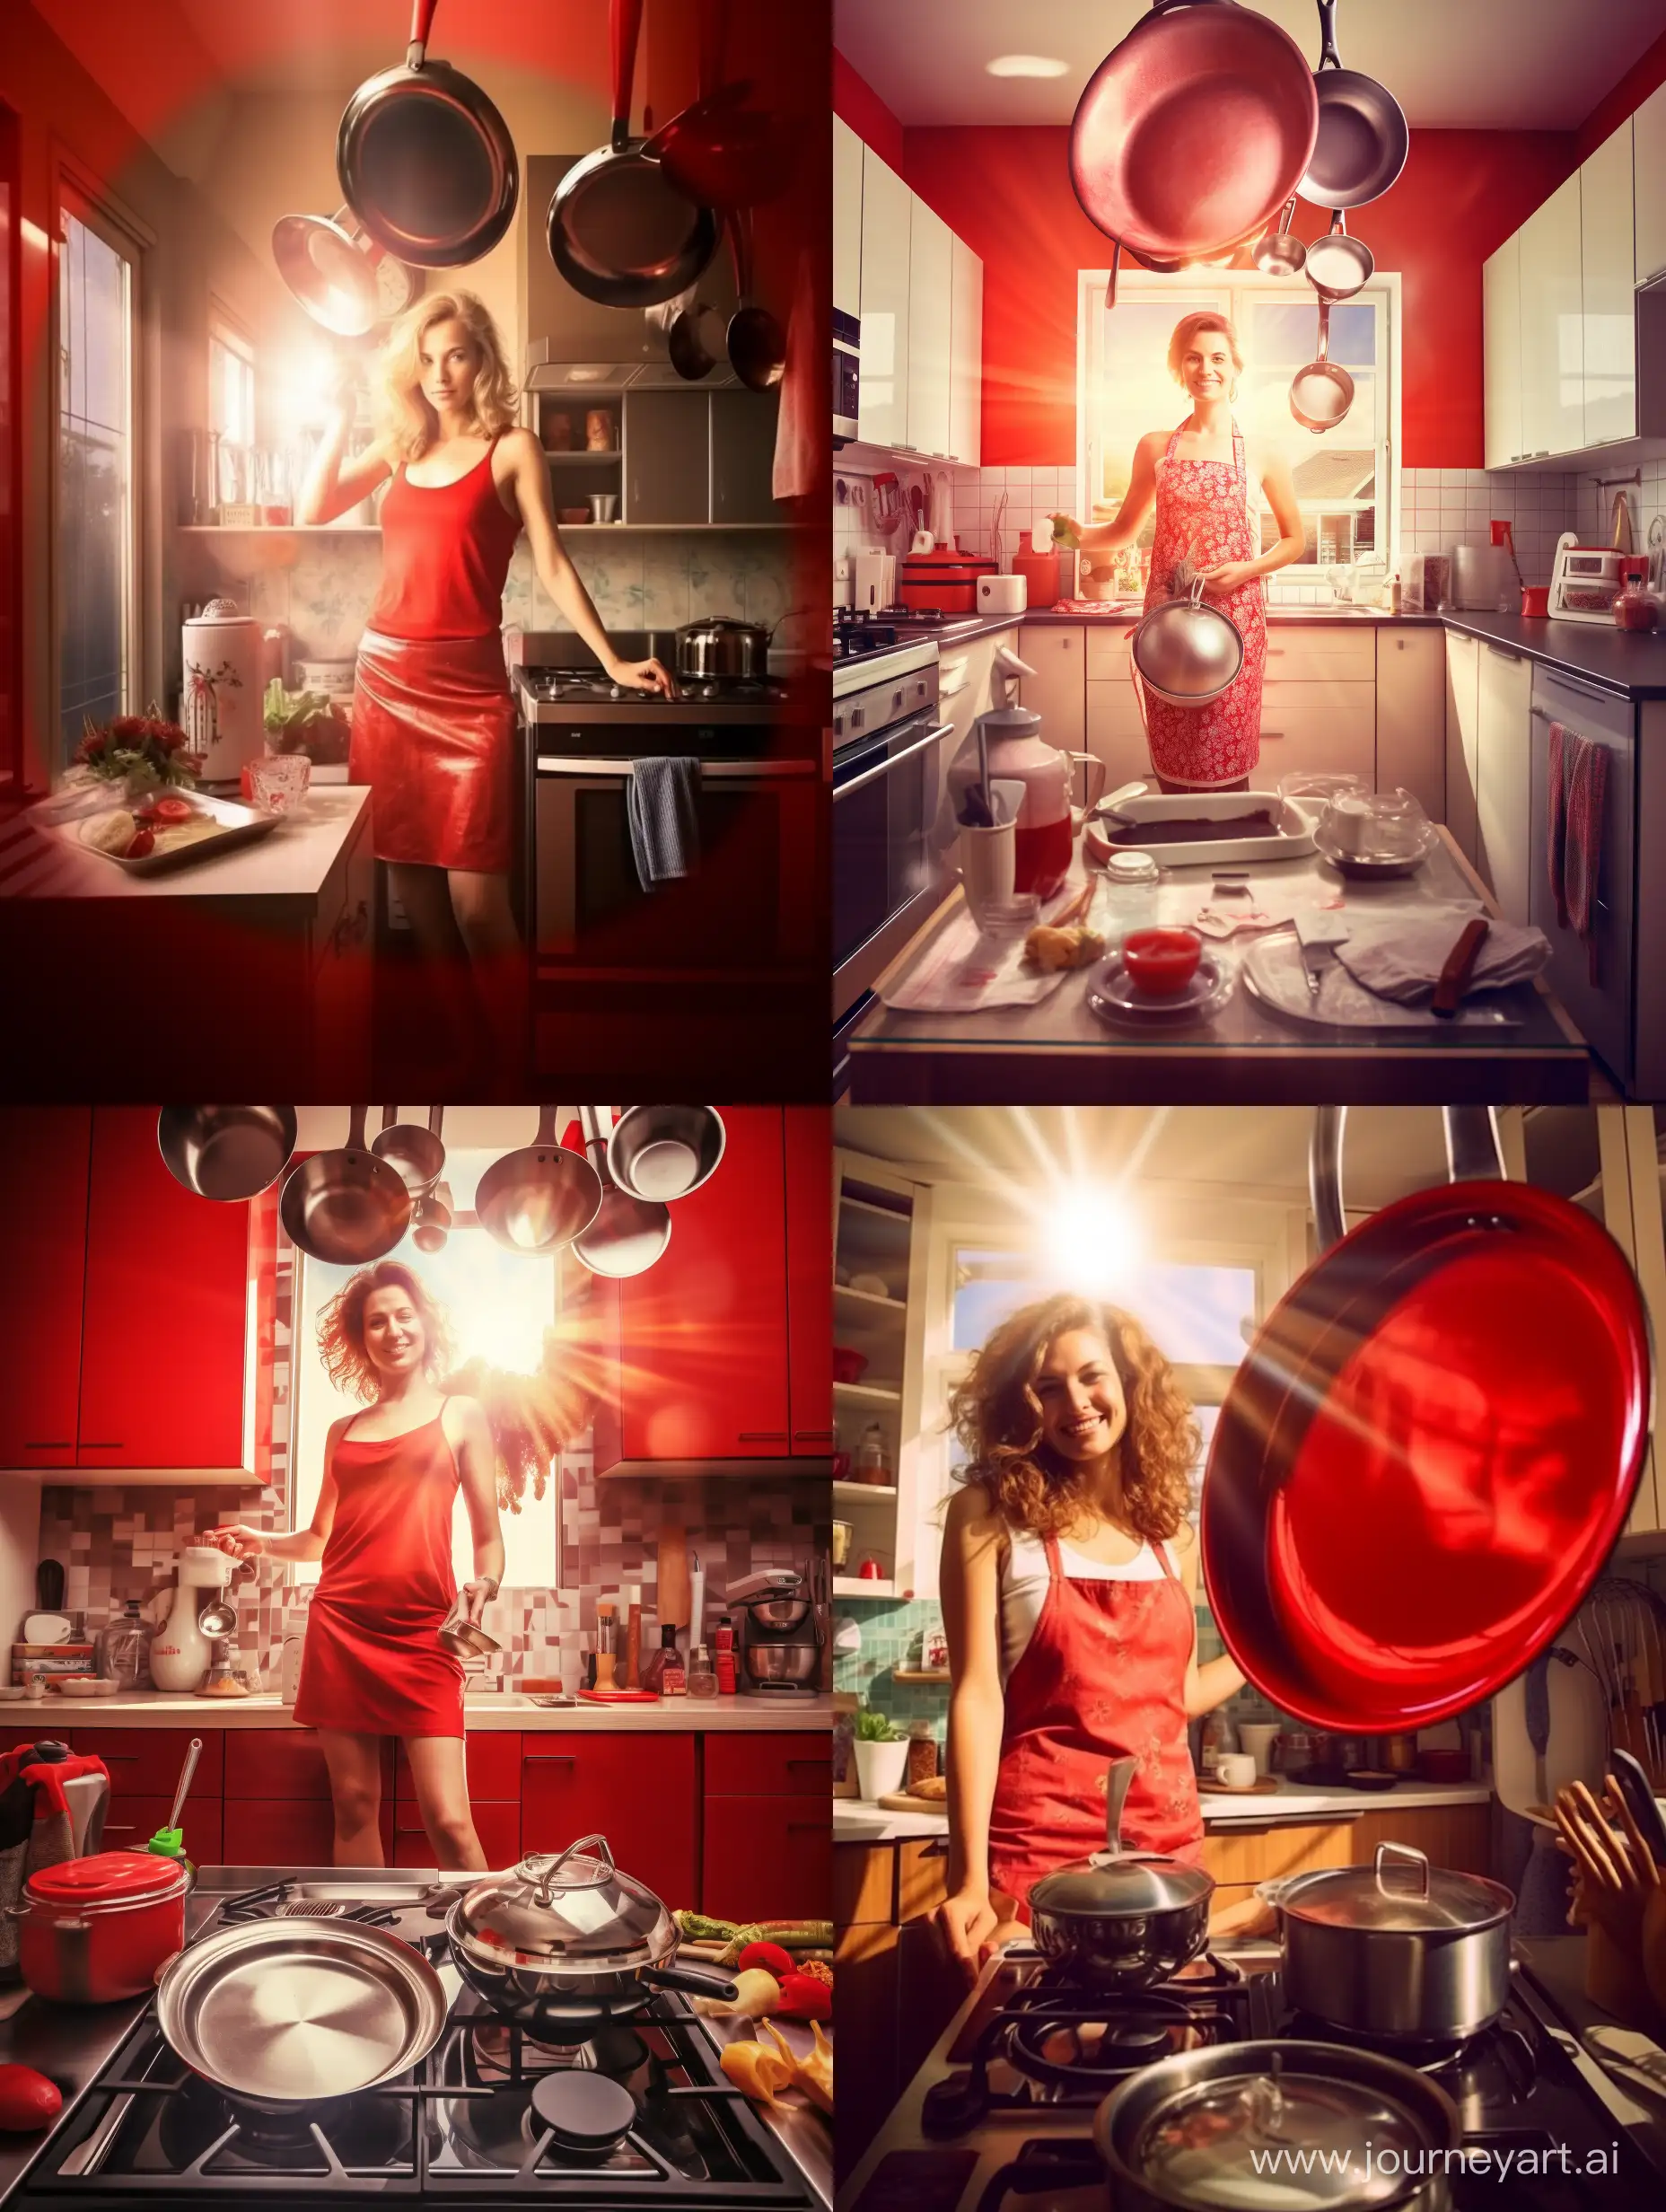 Symmetrical photo of a sunny home rich kitchen with equipment and products. A beautiful 40-year-old European housewife stands directly in front of the viewer, smiling and looking into a large shiny frying pan as if into a mirror. He holds a frying pan in his left hand. The picture contains bright advertising red and silver tones.